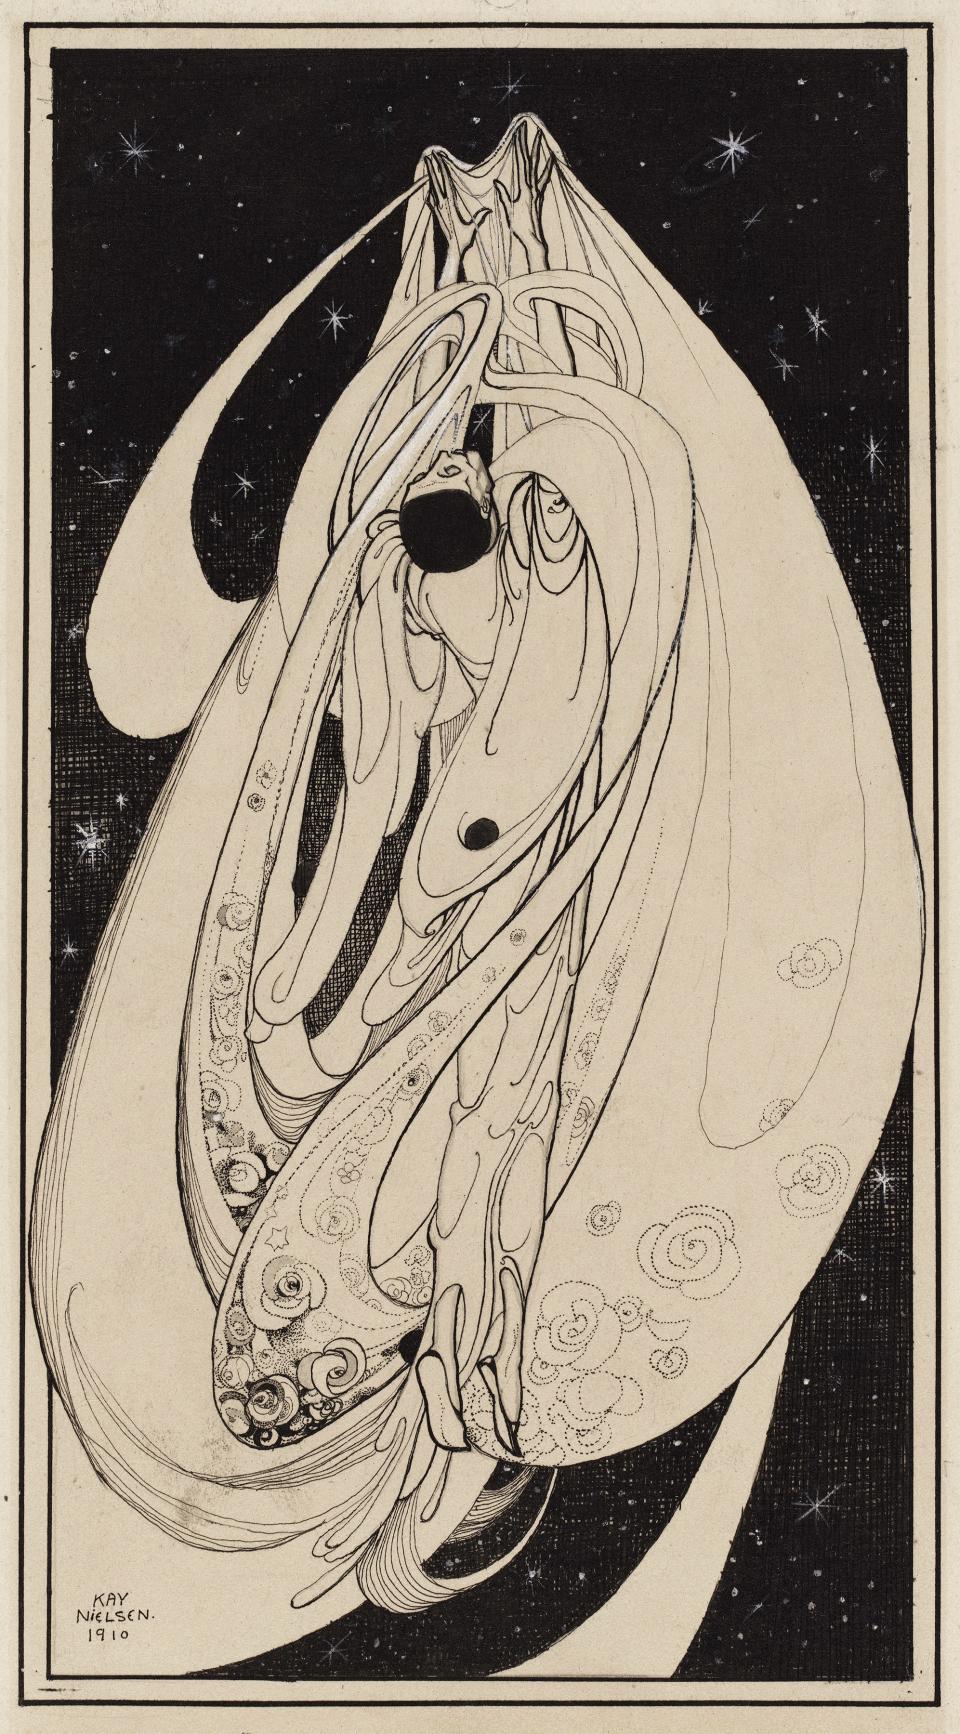 Yearning, from The Book of Death series. Kay Nielsen, 1910. Pen and brush and ink, opaque watercolor, over graphite.
Promised gift of Kendra and Allan Daniel.